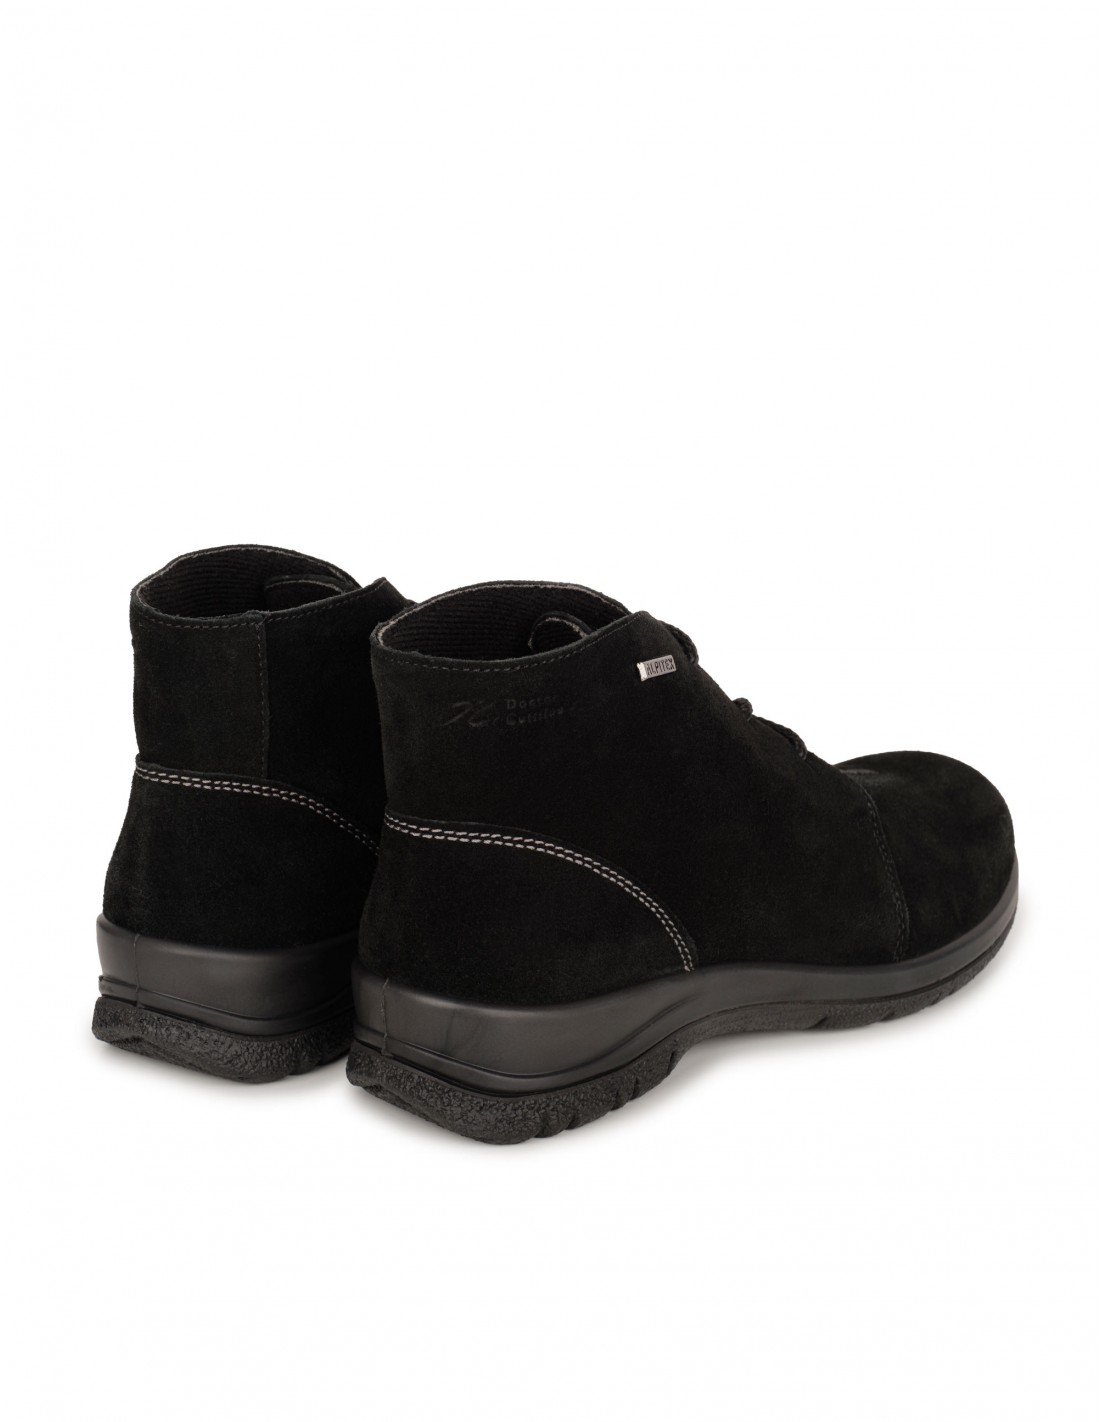 BOTINES IMPERMEABLES MUJER DOCTOR CUTILLAS 37213 NEGRO